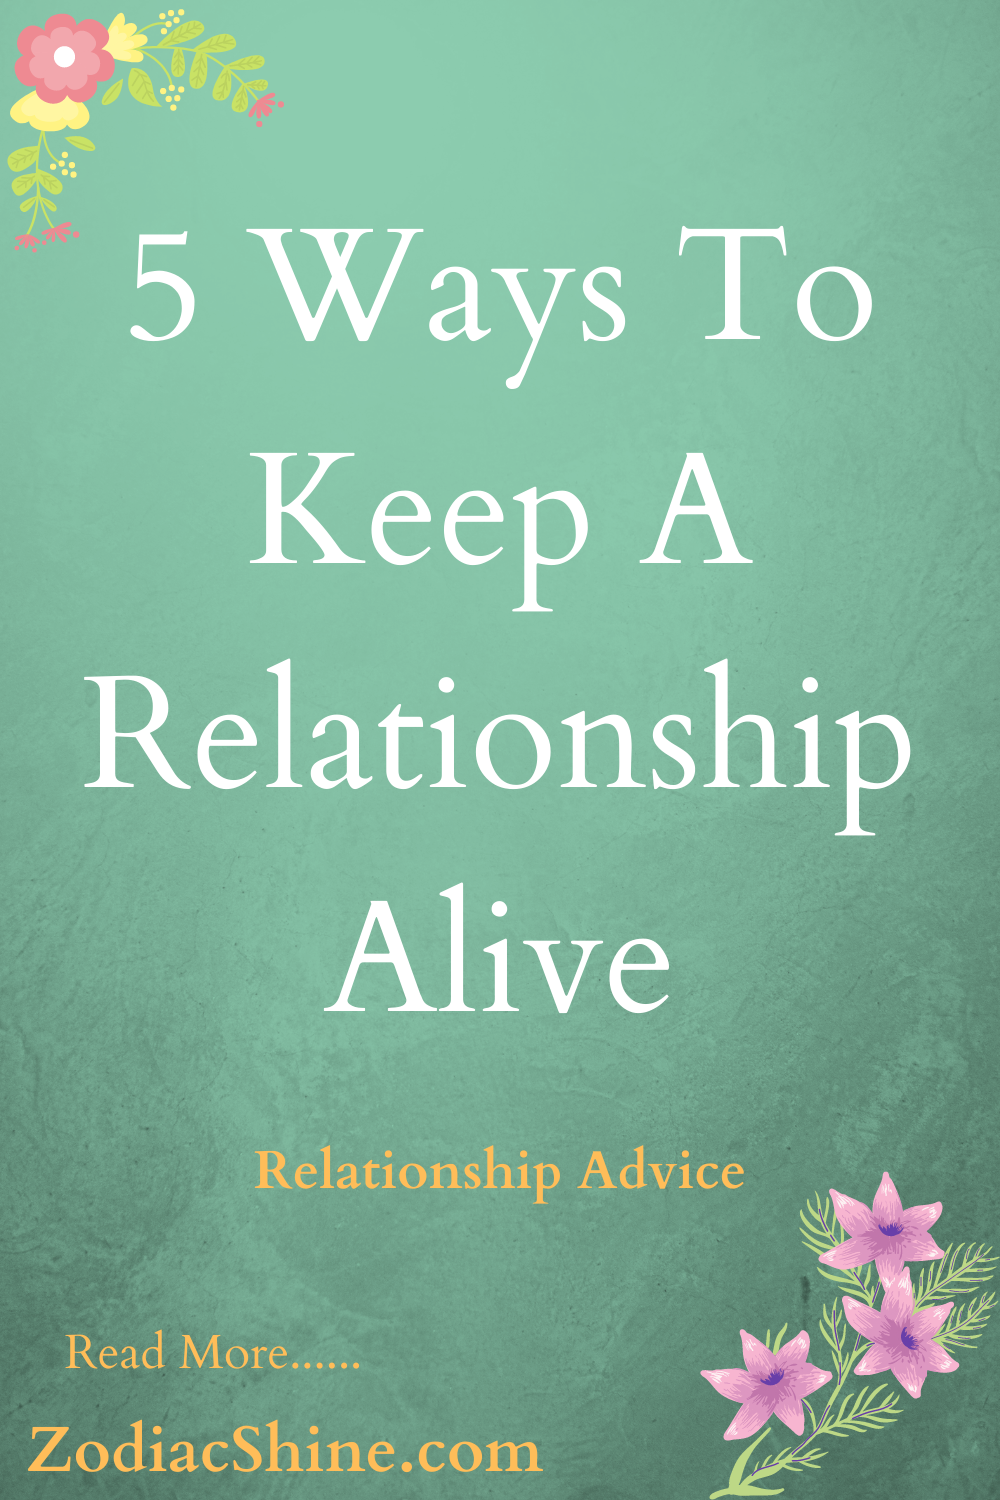 5 Ways To Keep A Relationship Alive